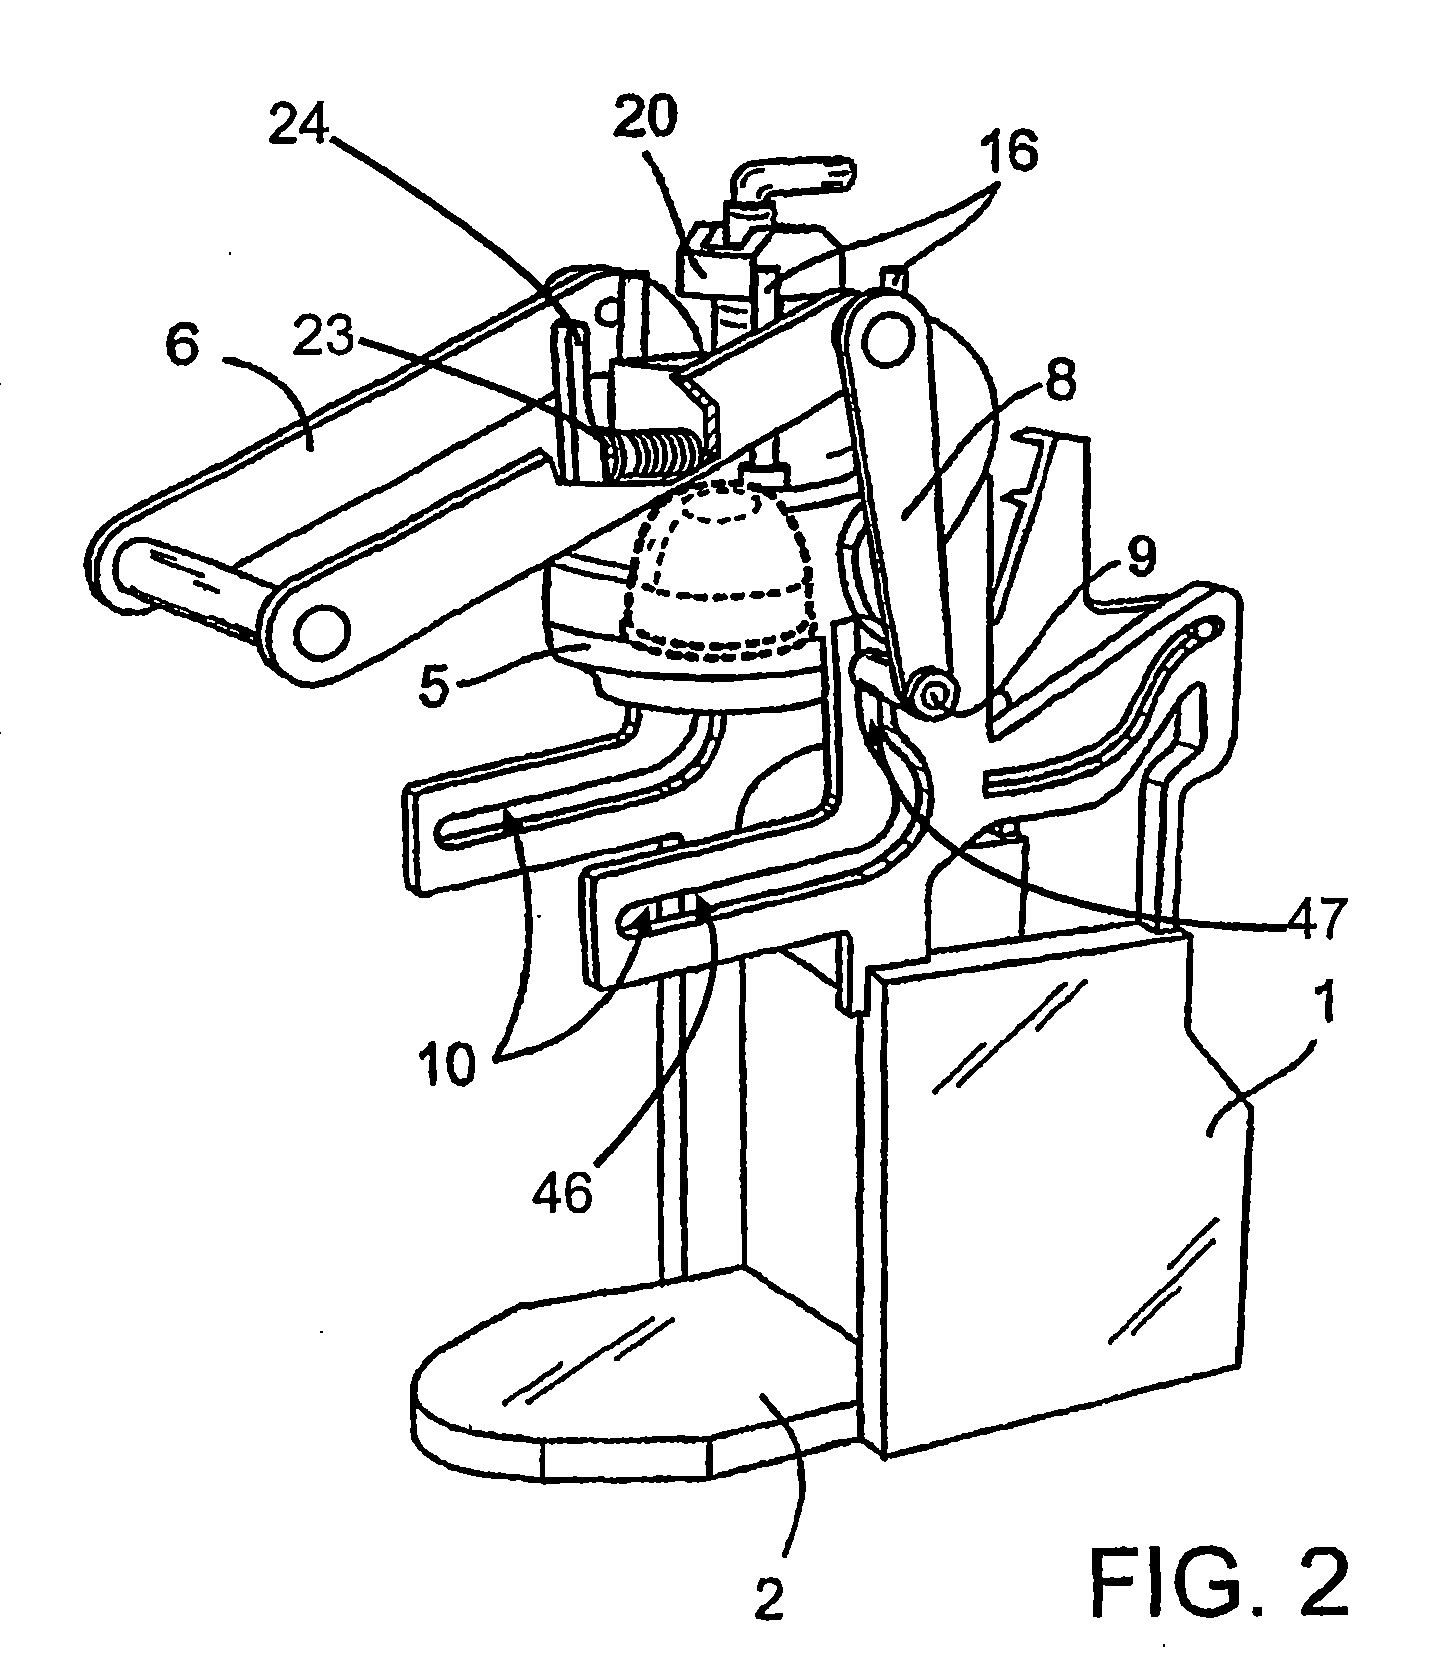 Methods of preparing a food product from a cartridge